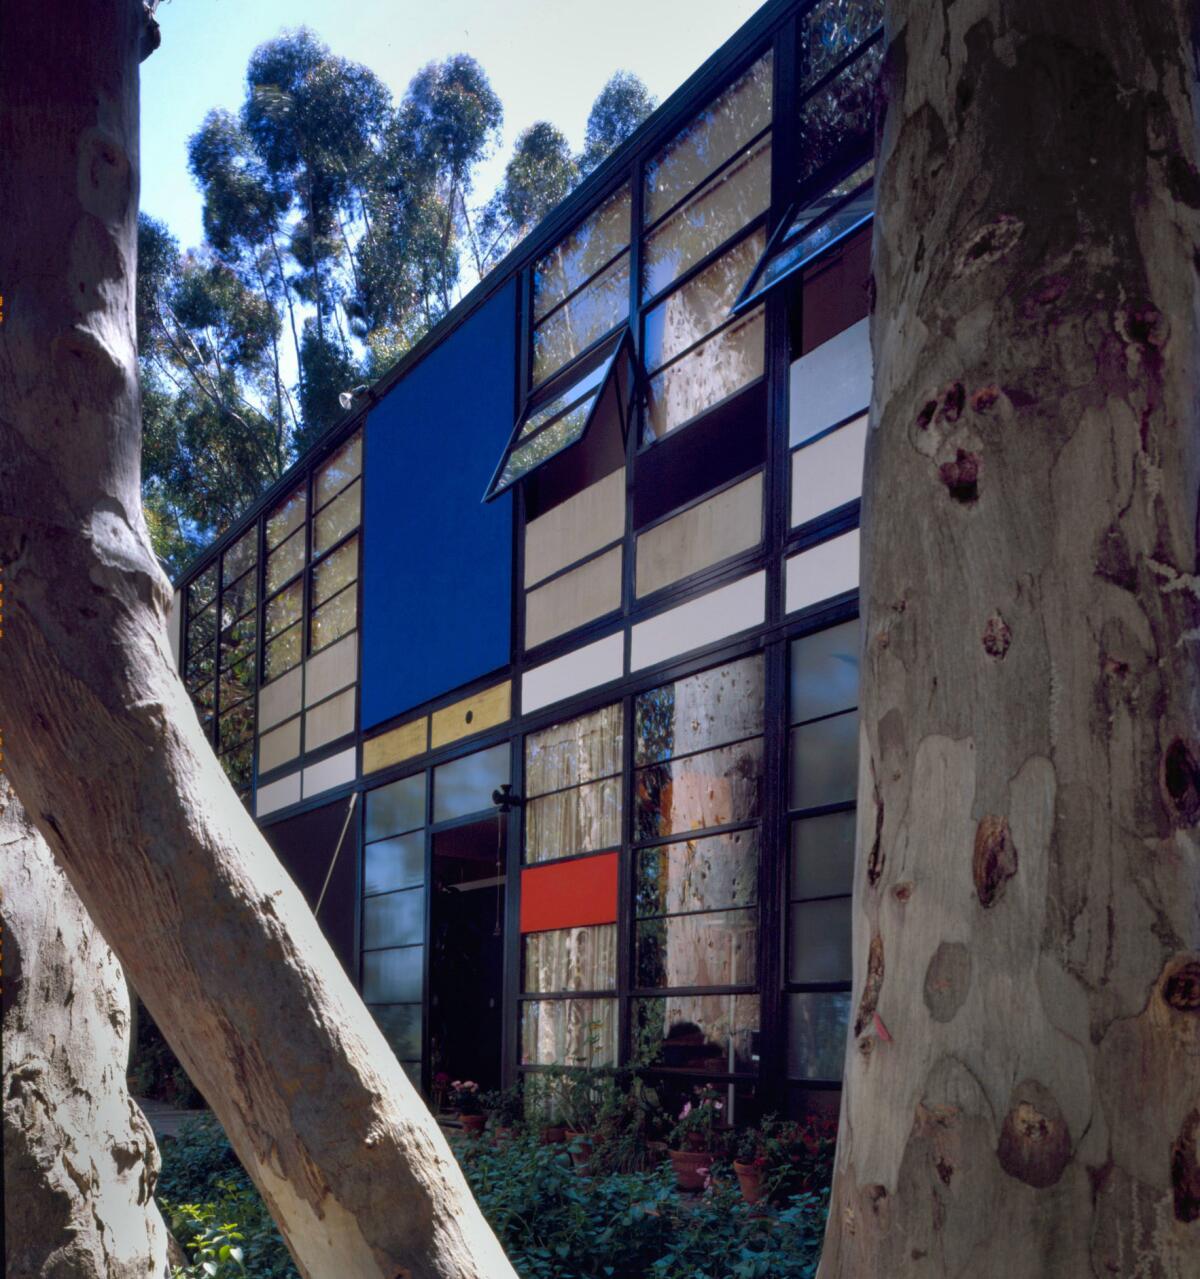 The front side of the Eames House Case Study